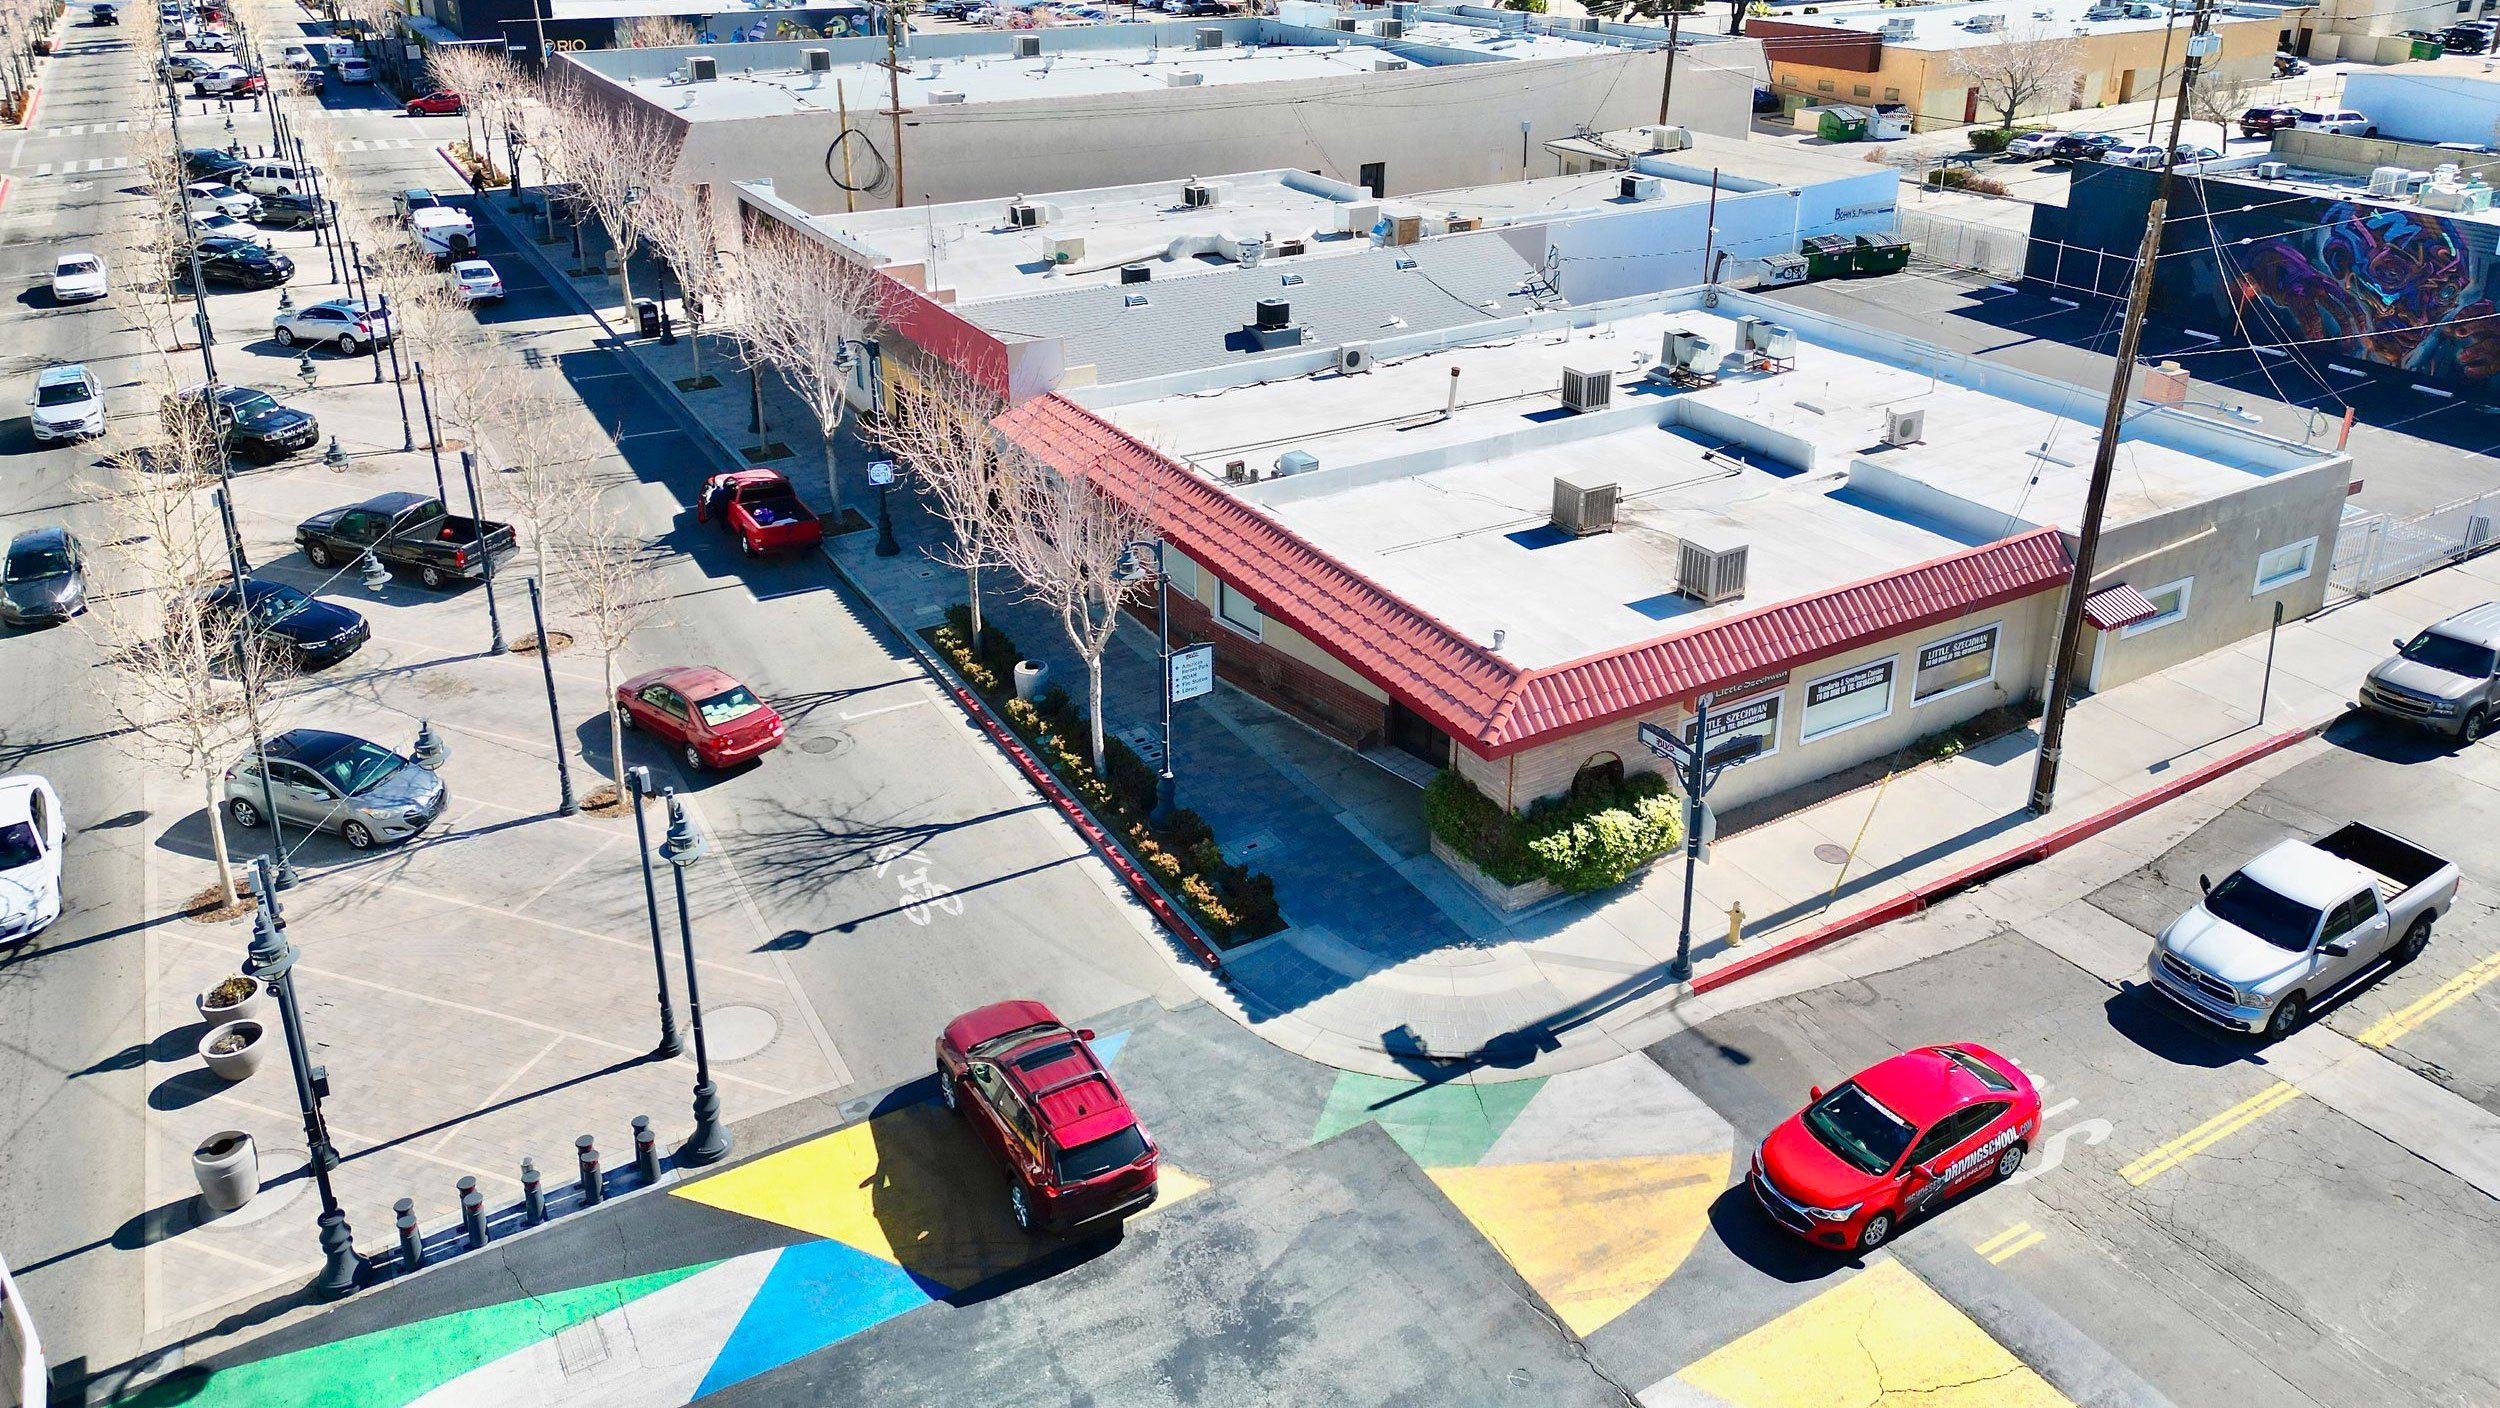 An aerial view of a street intersection with colorful street art, a red-roofed building, and parked cars, under a clear sky.